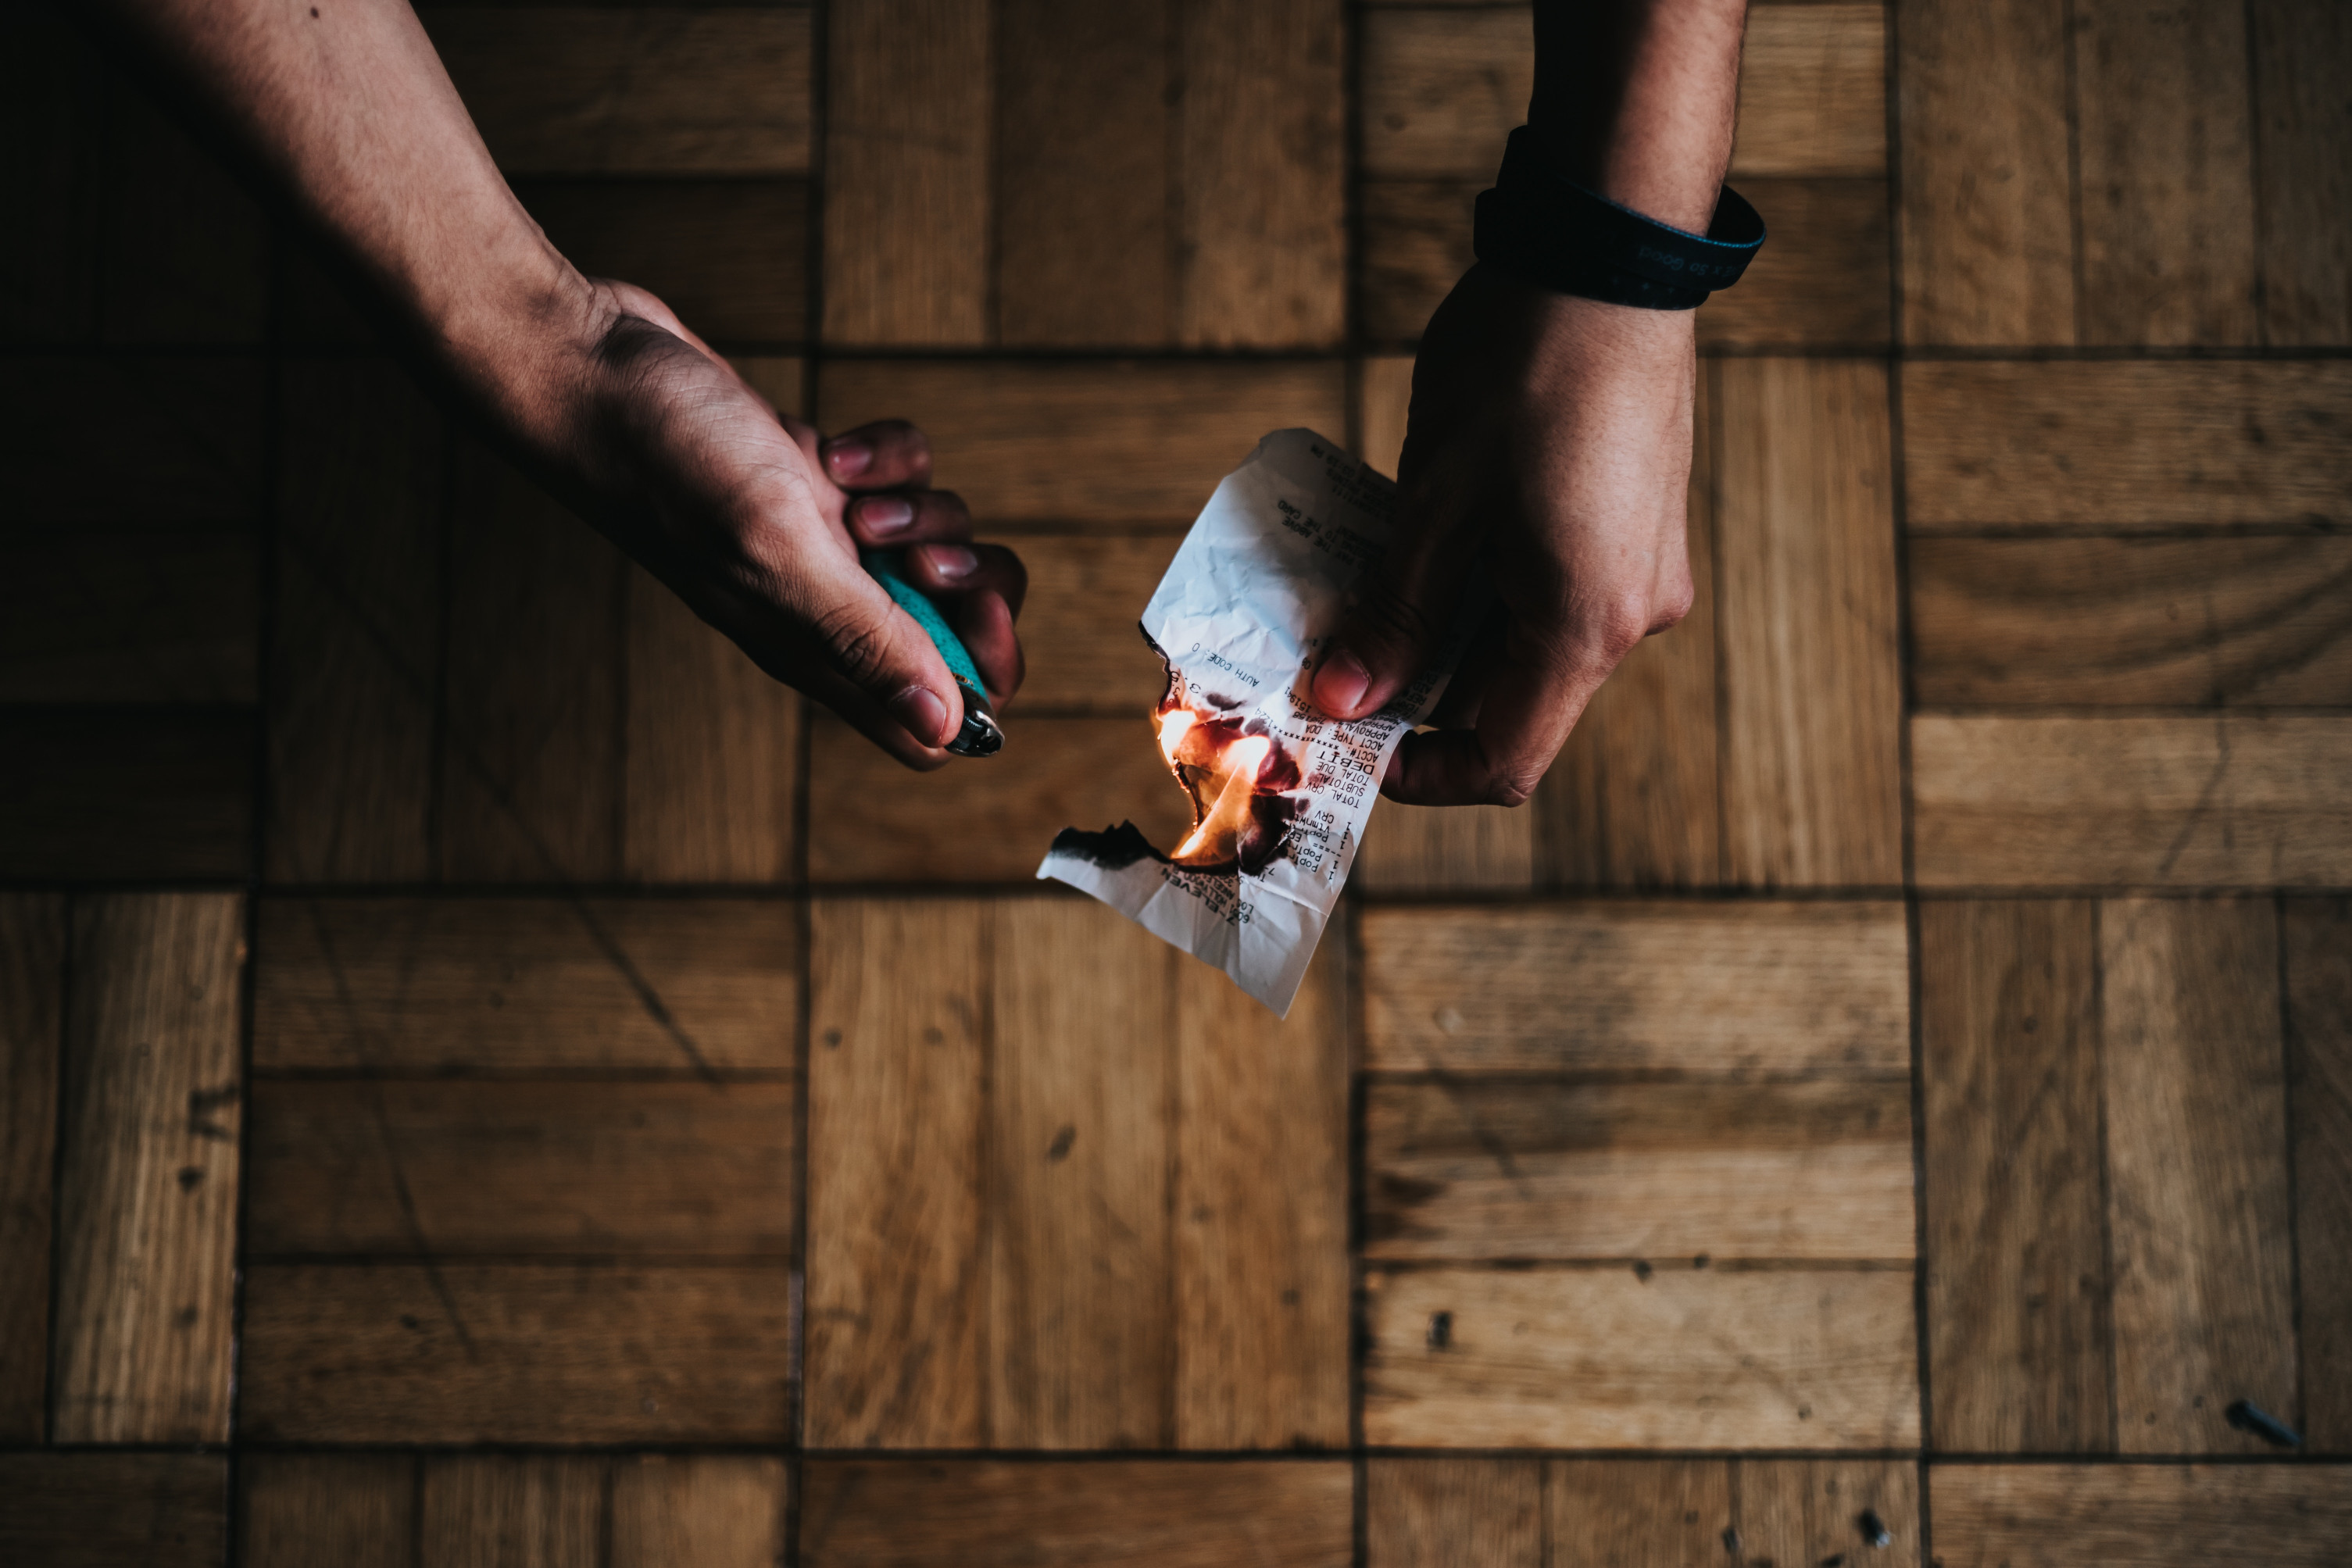 a picture showing a person burning a paper